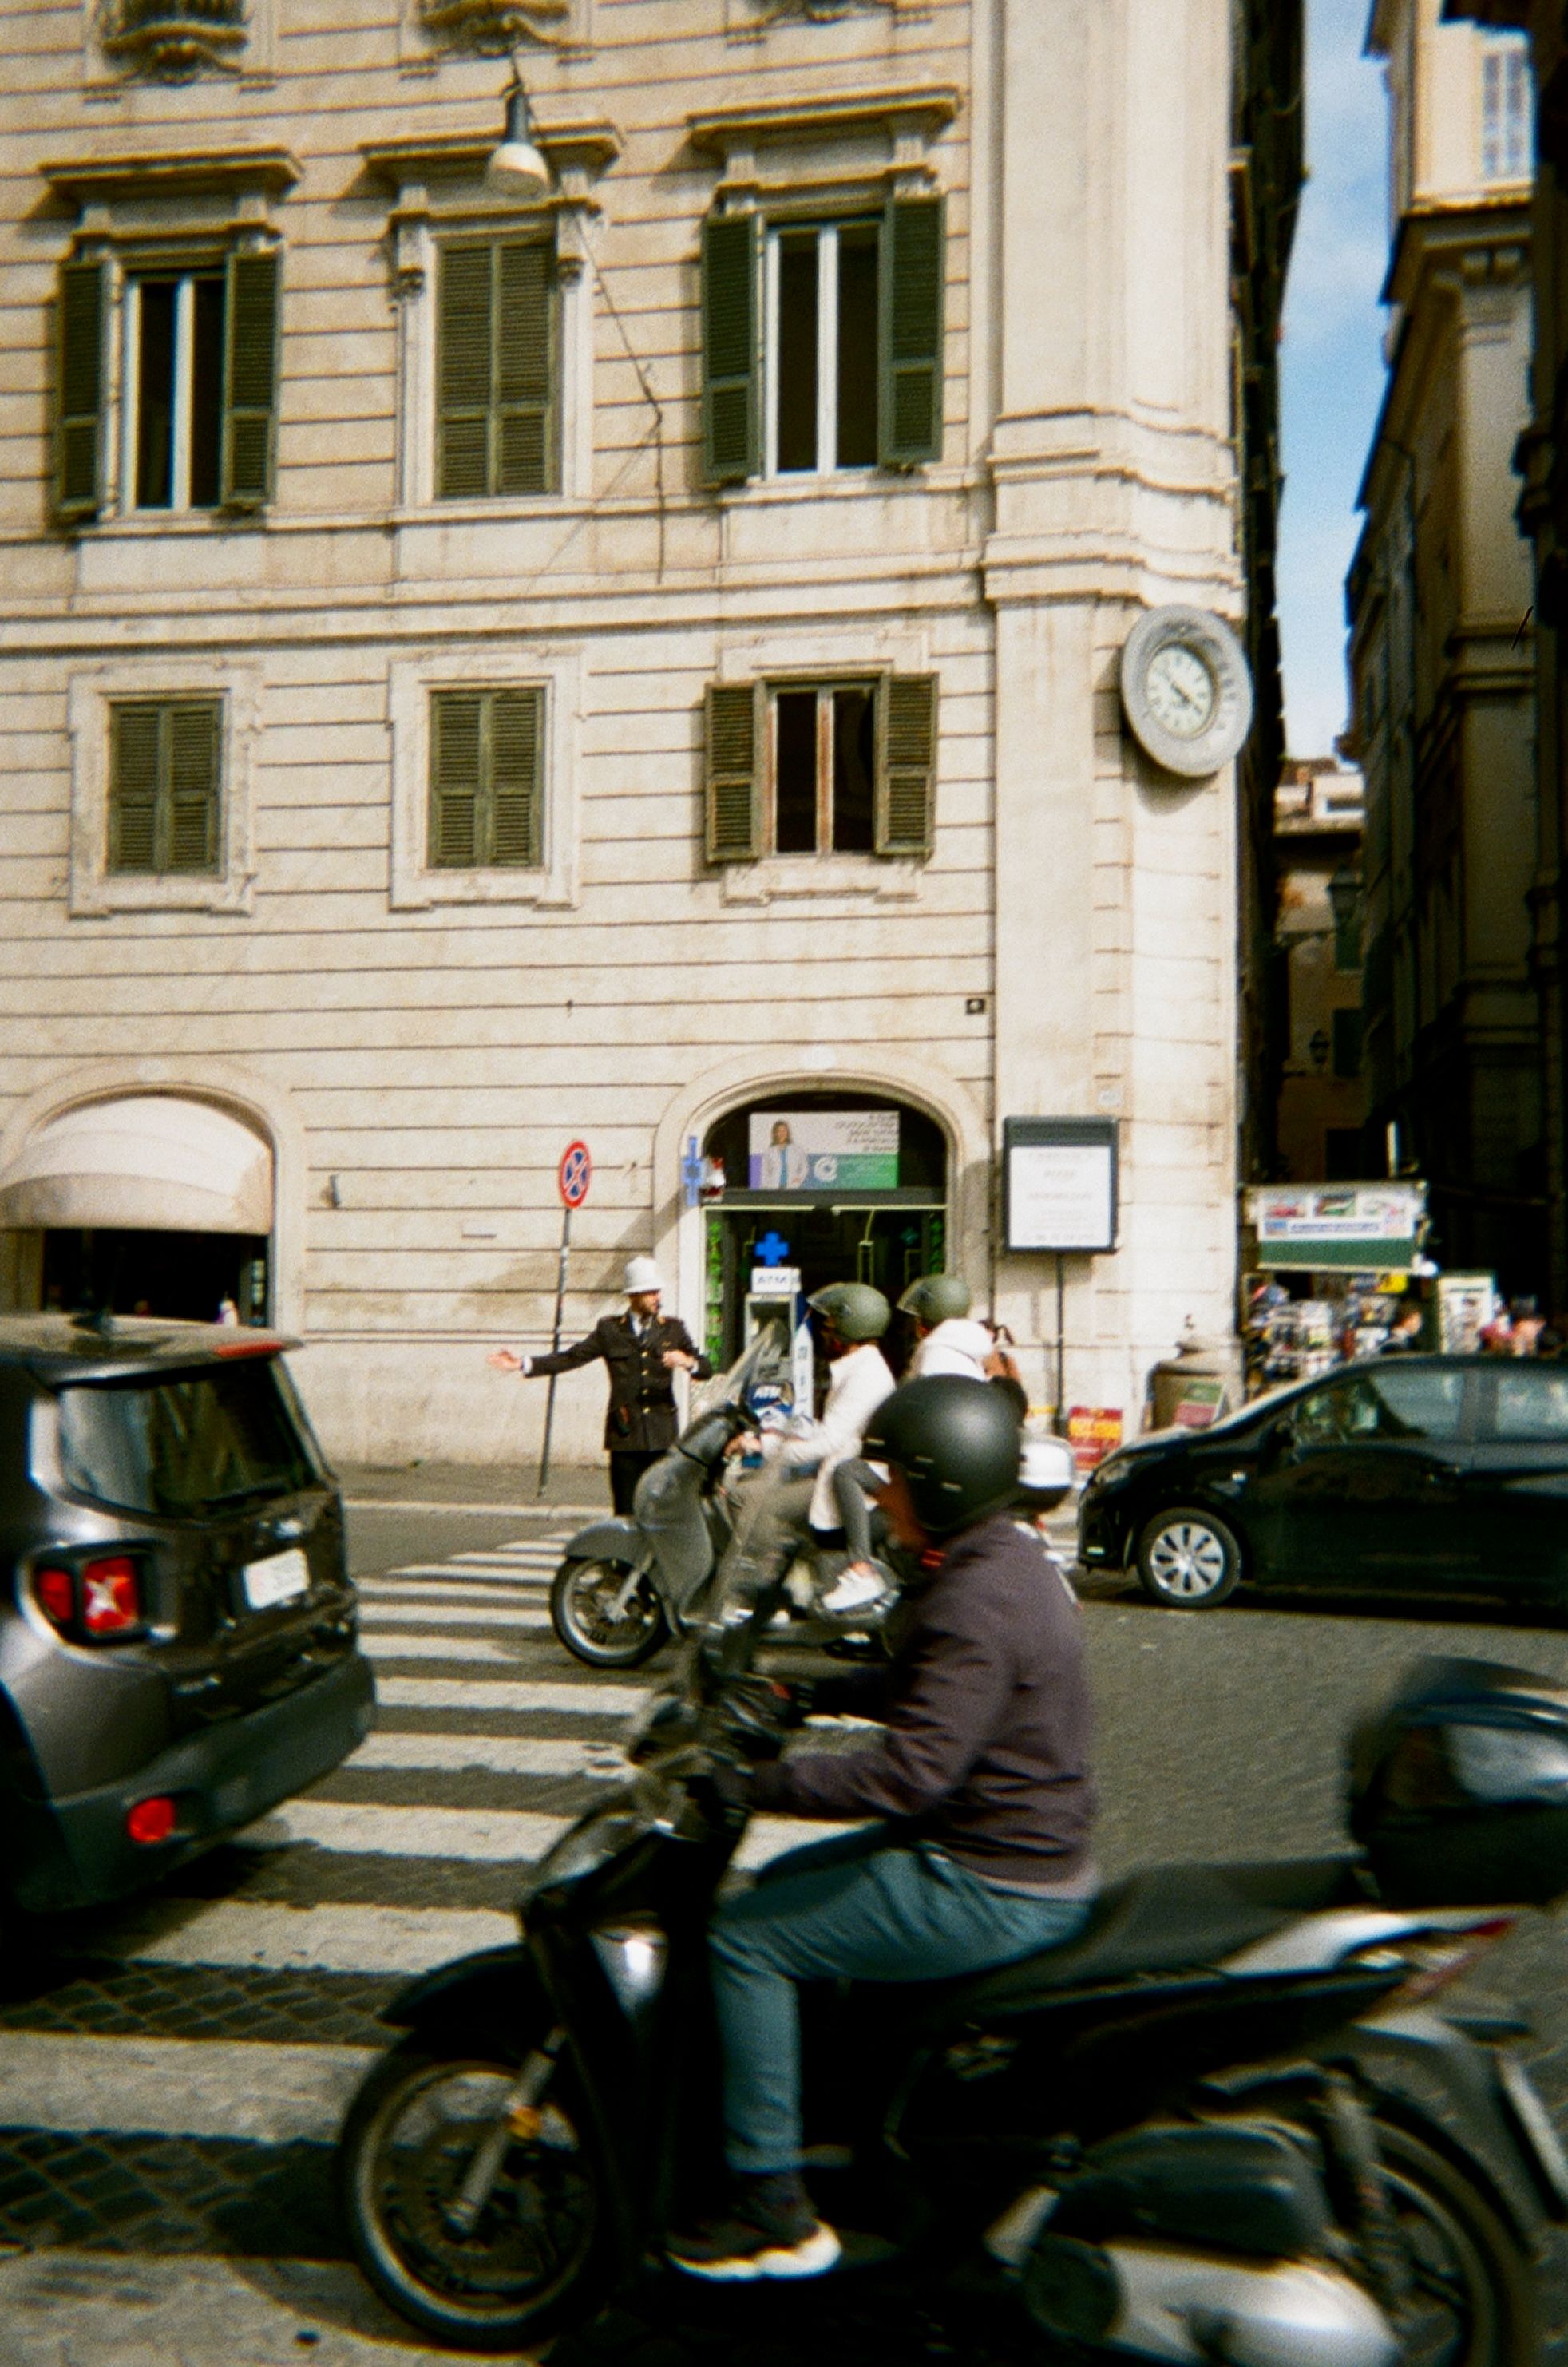 A bustling intersection in Rome, Italy, where a traffic officer directs vehicles and pedestrians. Several motorcyclists and a car are seen moving through the crosswalk. The backdrop features a historic building with green shutters and a large clock mounted on its corner, adding to the city's characteristic charm.